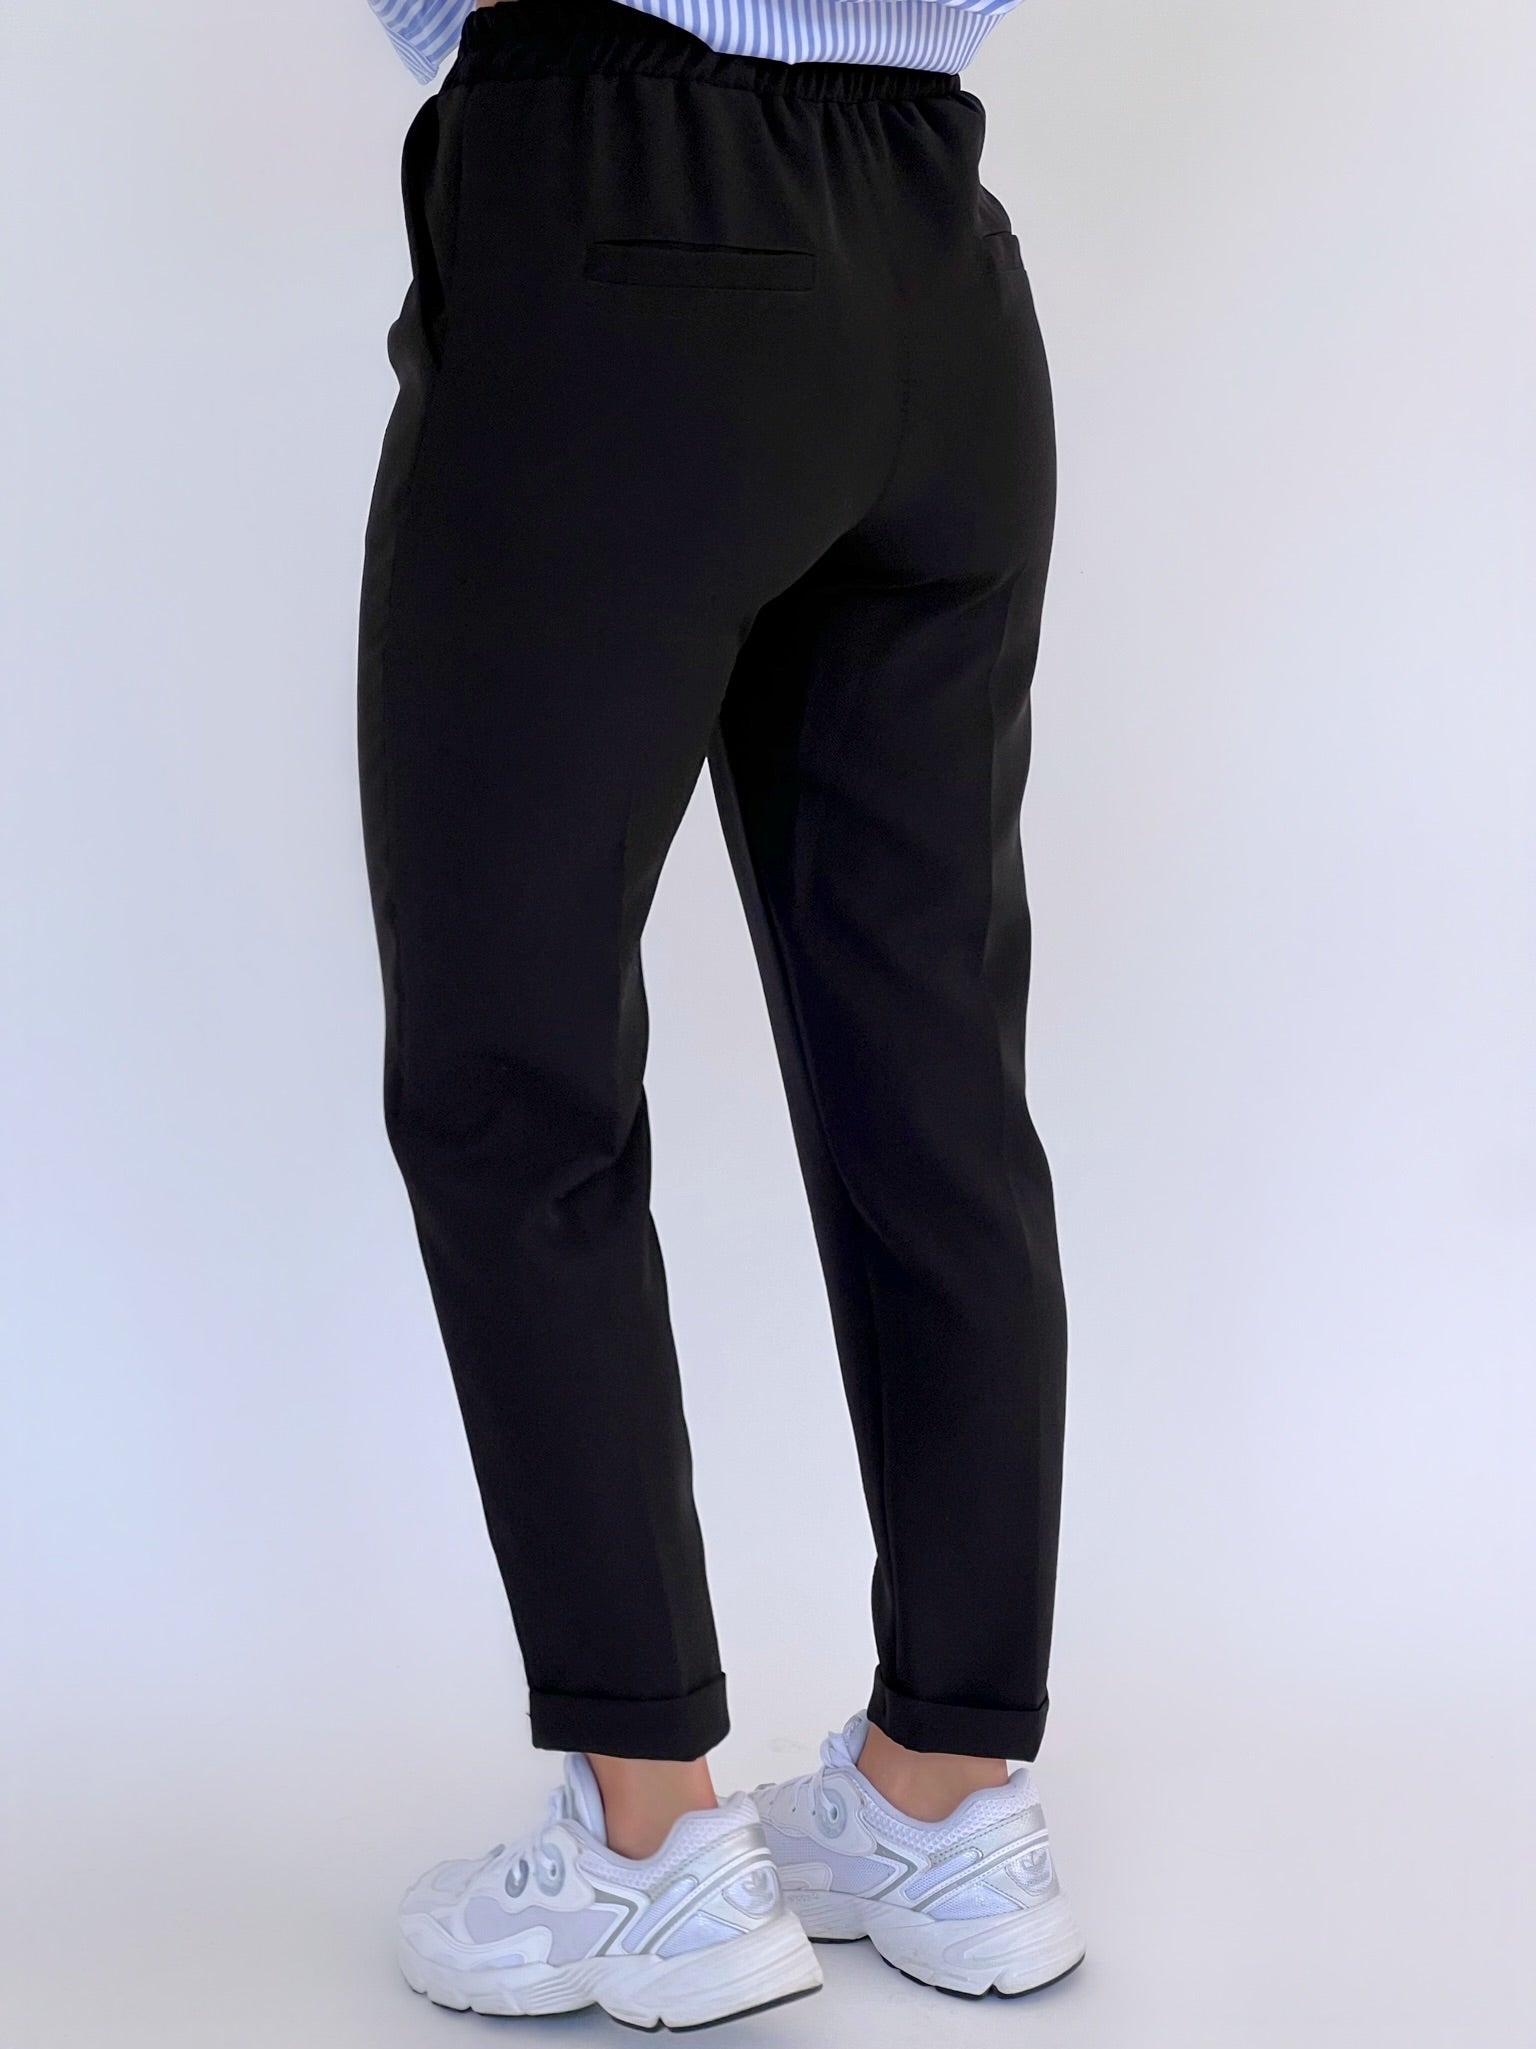 SKINNY TROUSER WITH ELASTICATED WAIST IN BLACK